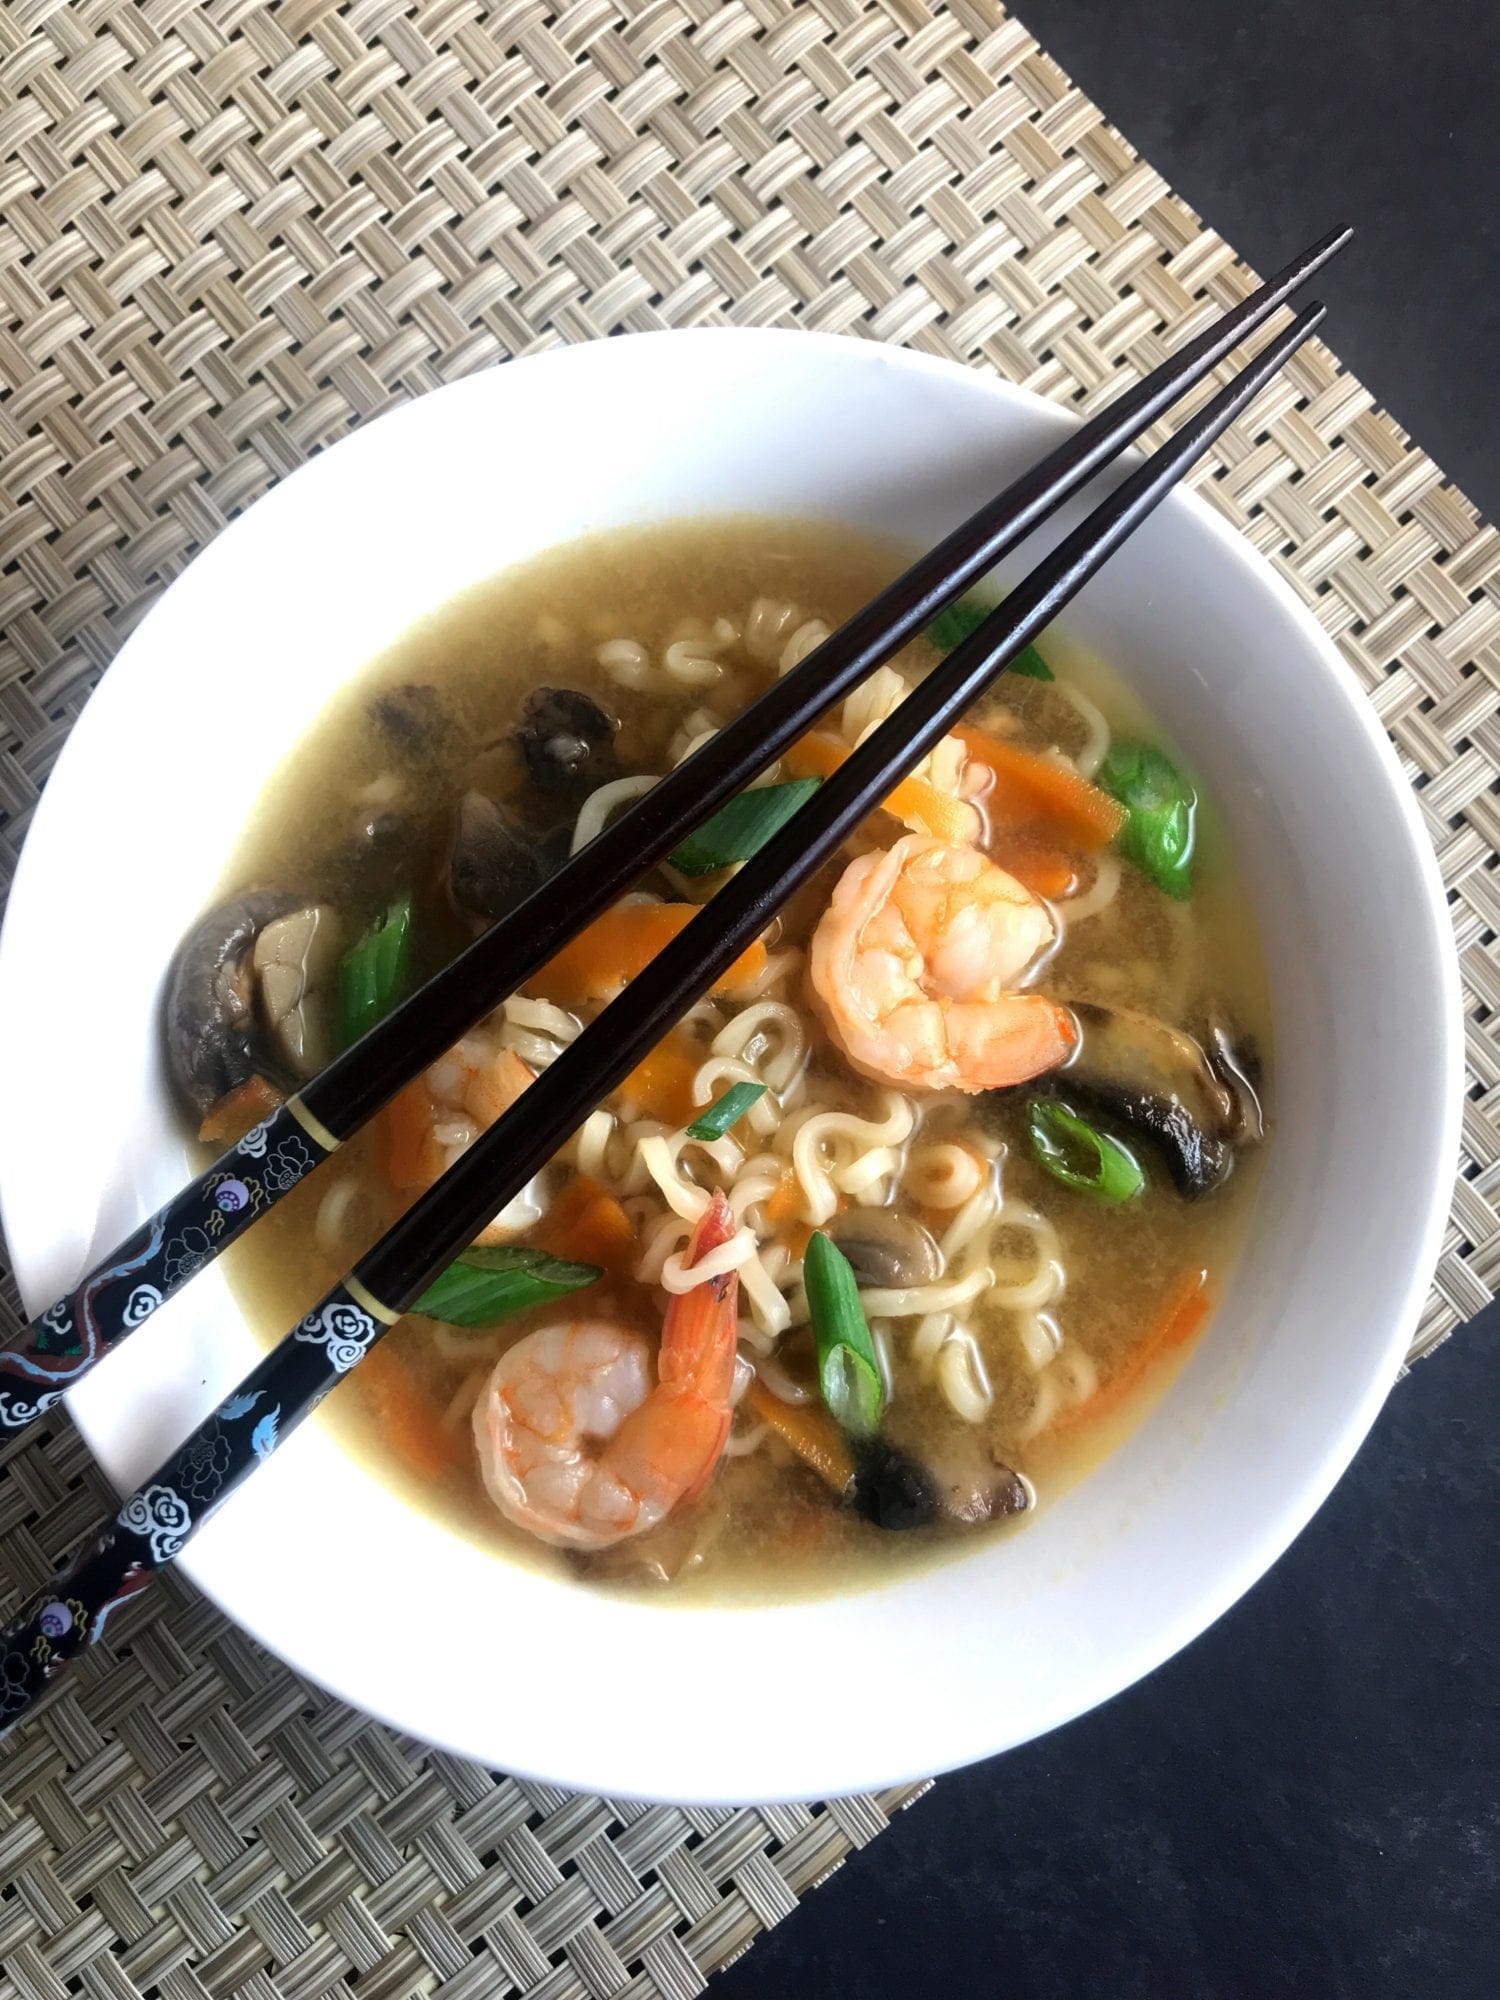 Shrimp, Ramen noodles, carrots, and mushrooms are cooked in a vegetable broth flavored with ginger and garlic in this simple Asian-style soup. Just 4 WW FreeStyle SmartPoints per serving.